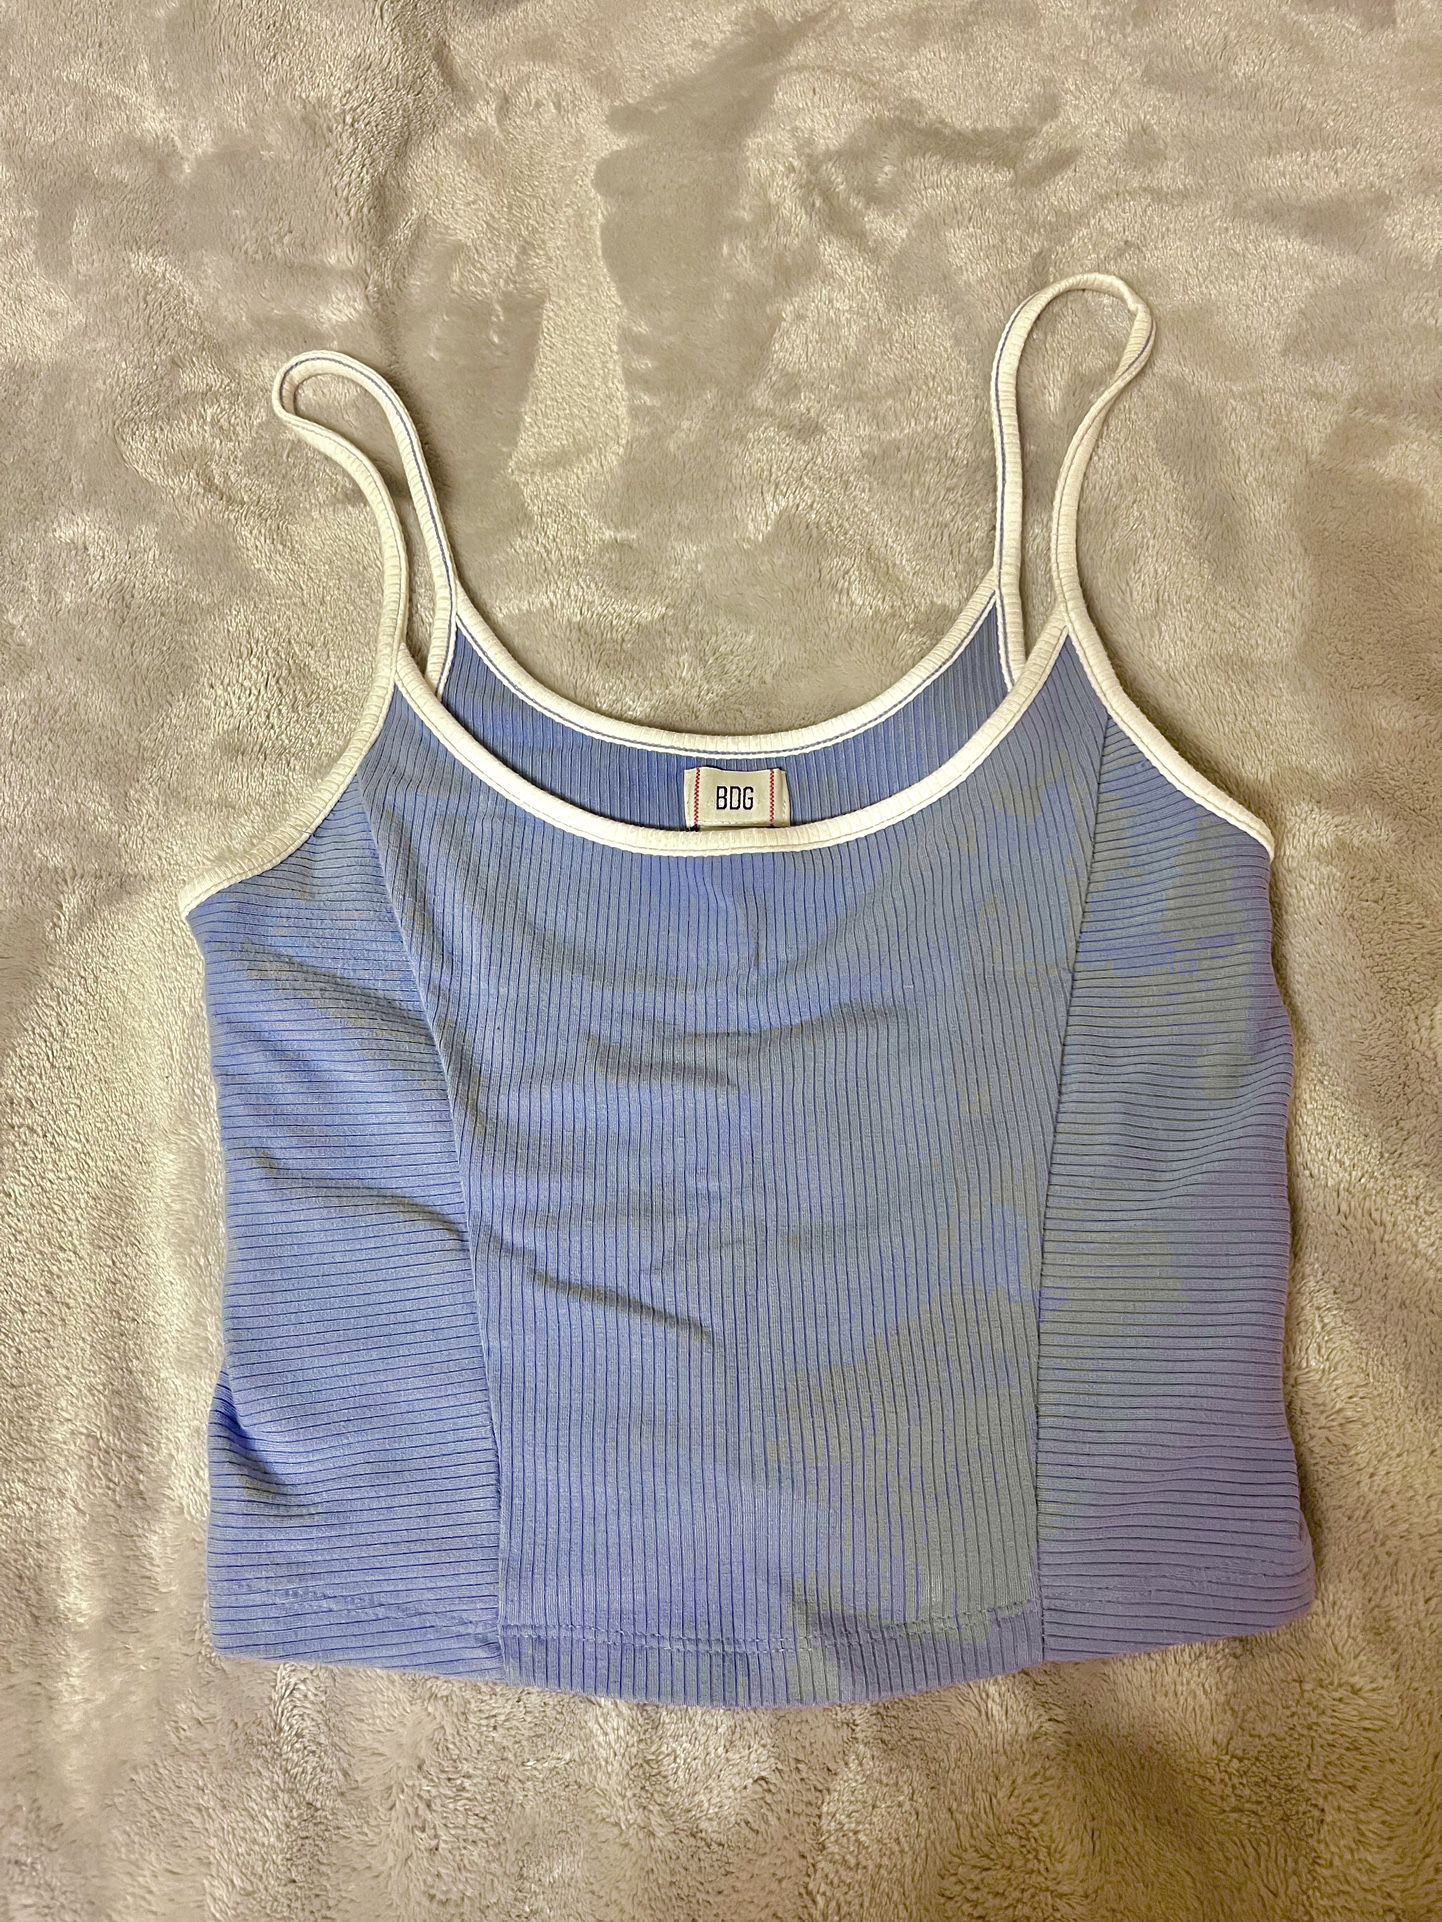 Urban Outfitters BDG Blue Crop Tank Top